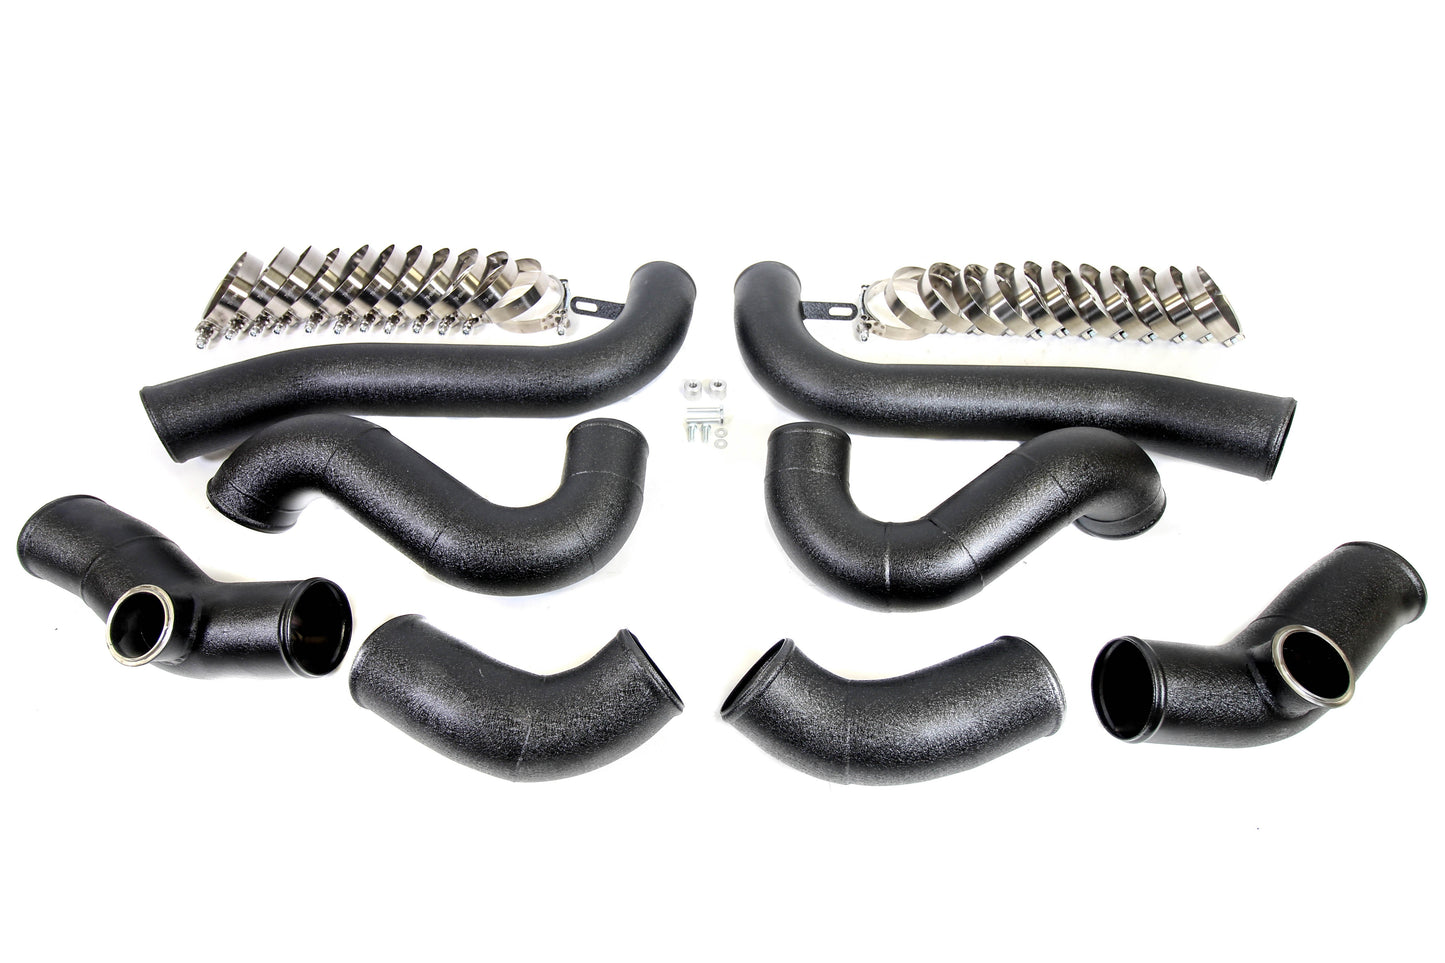 PLM - Race Intercooler Piping Kit for 2009+ Nissan GT-R R35